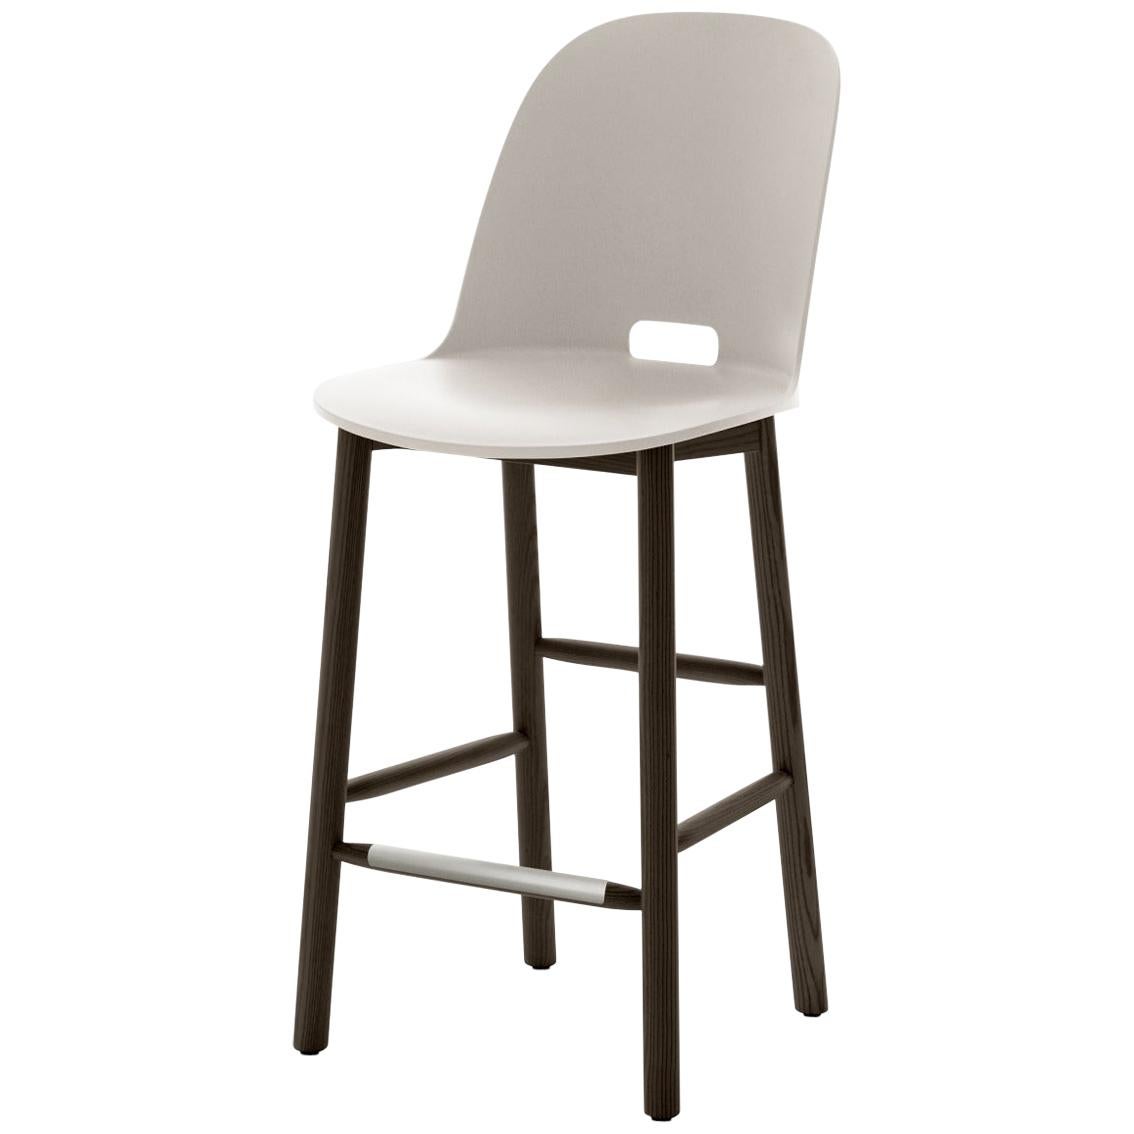 Emeco Alfi Counter Stool in White and Dark Ash w/ High Back by Jasper Morrison For Sale